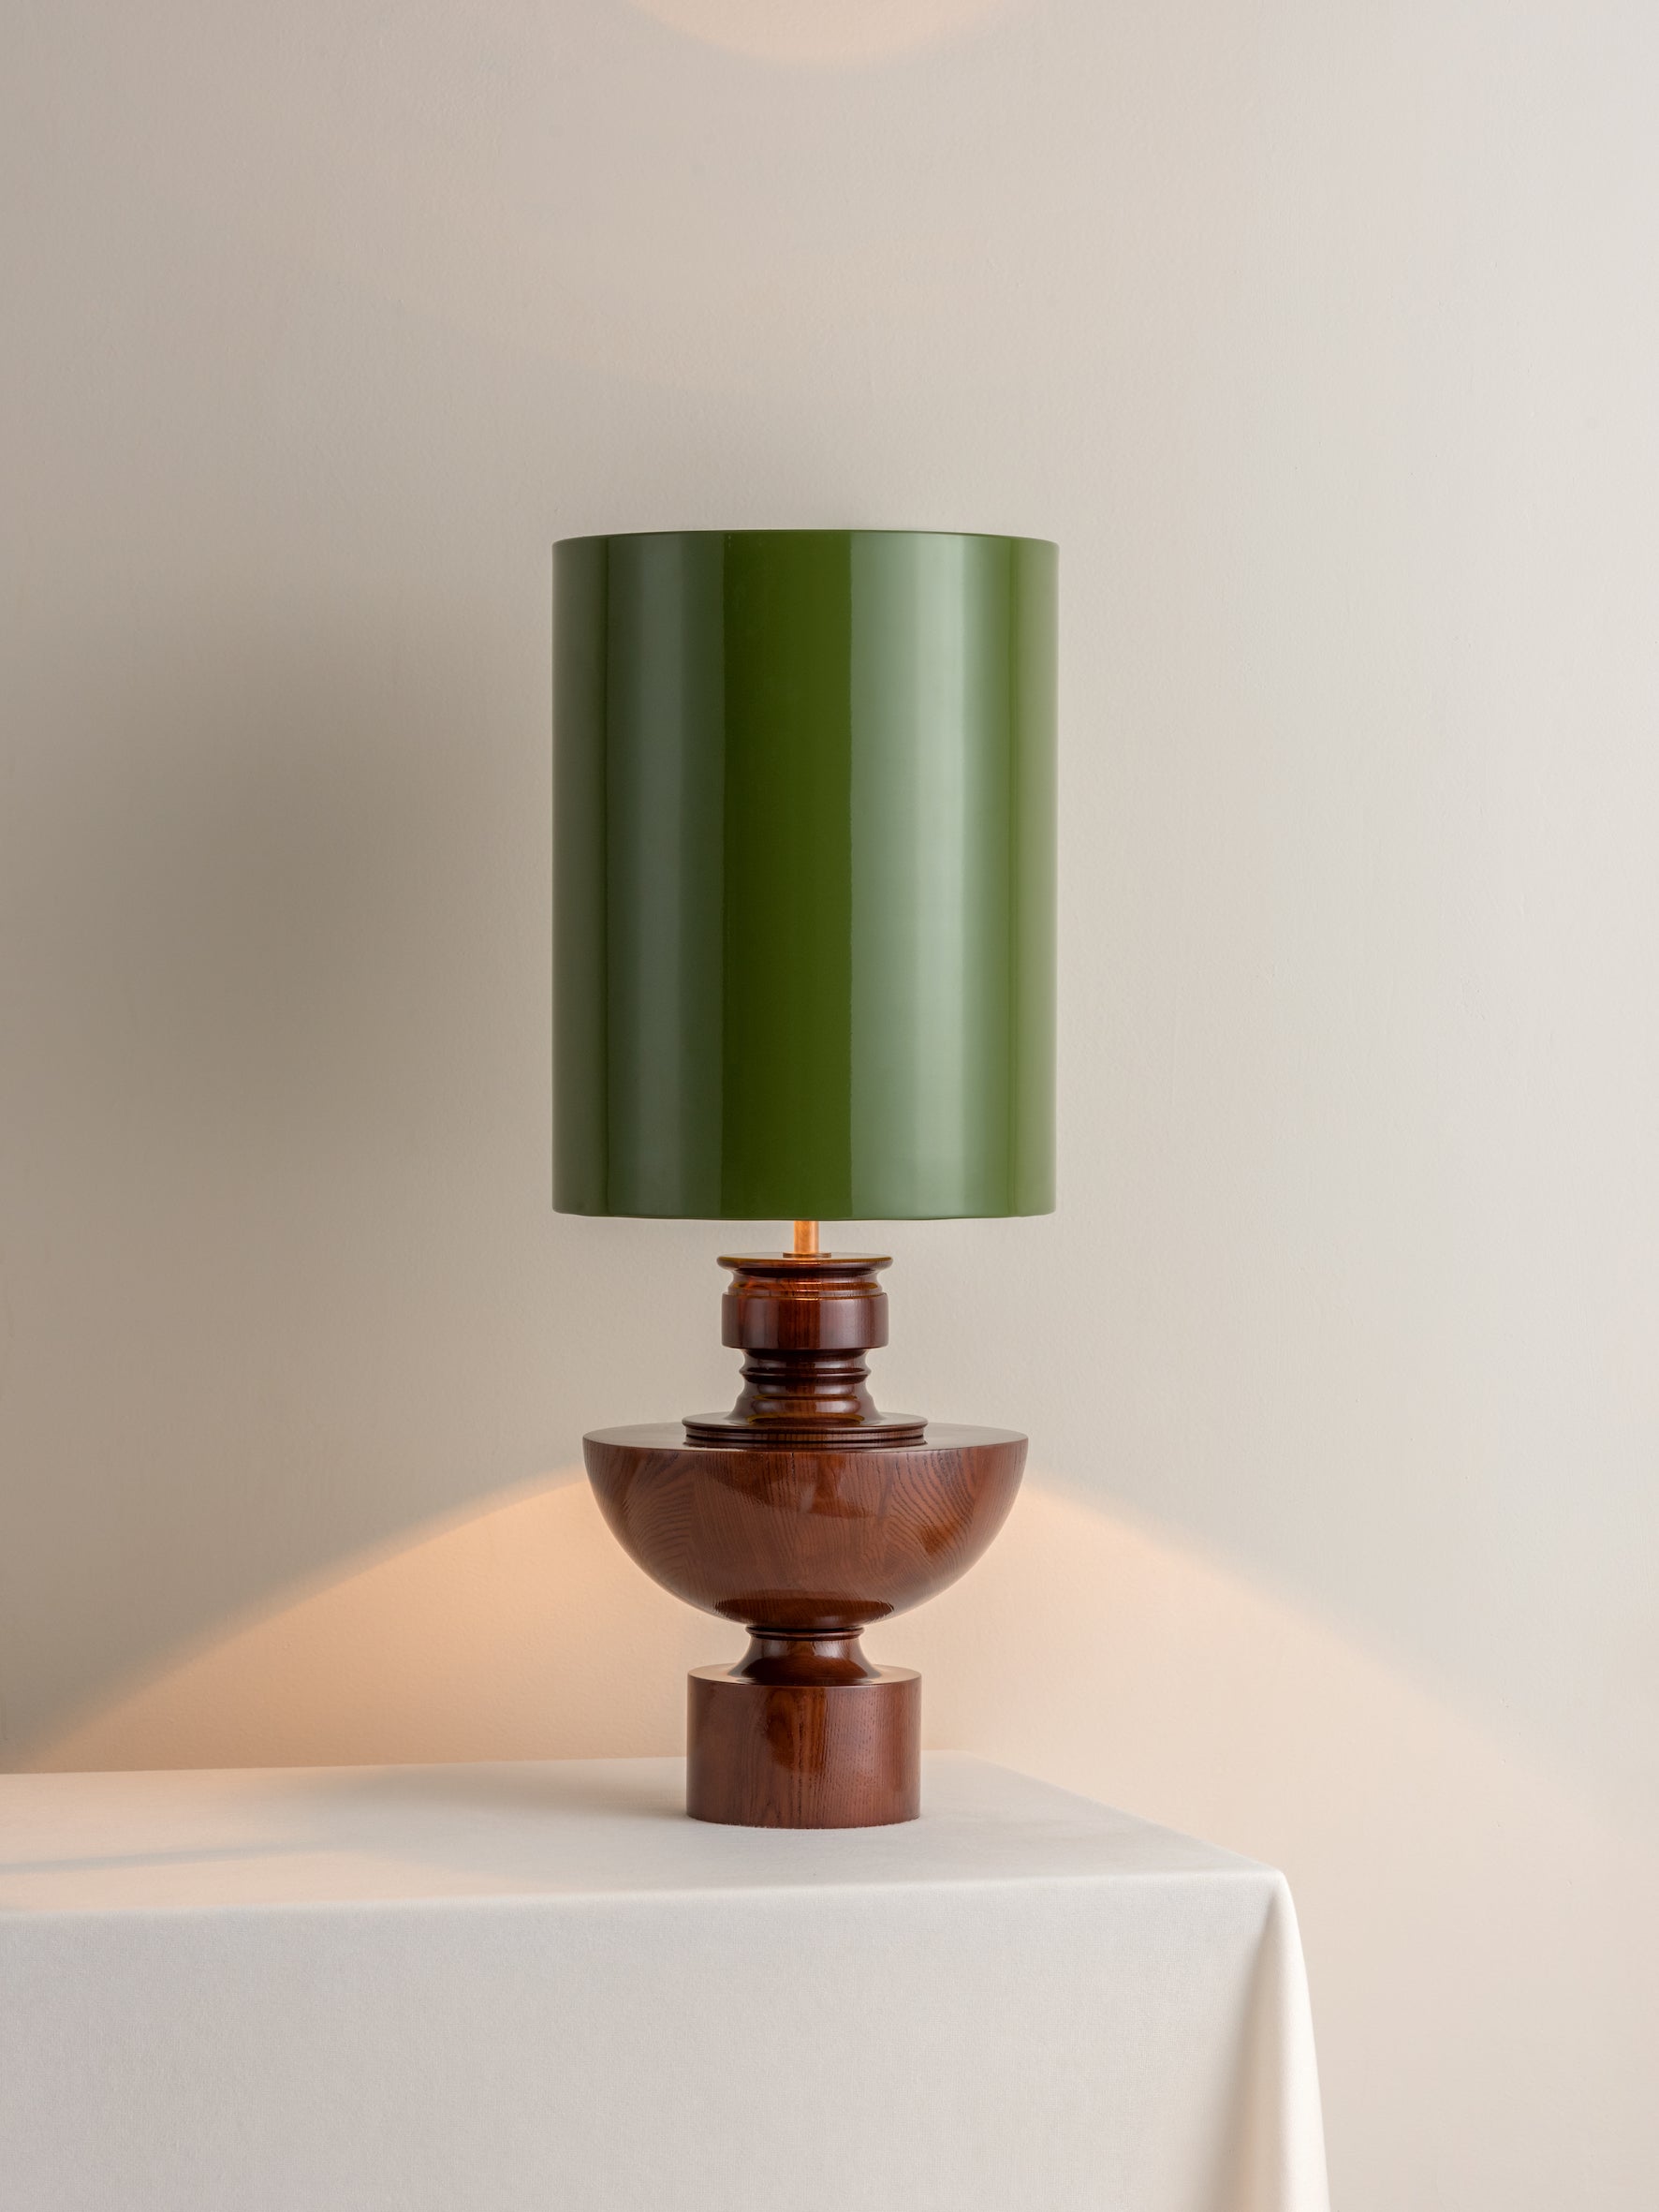 Editions spun wood lamp with + green lacquer shade | Table Lamp | Lights & Lamps Inc | Modern Affordable Designer Lighting | USA